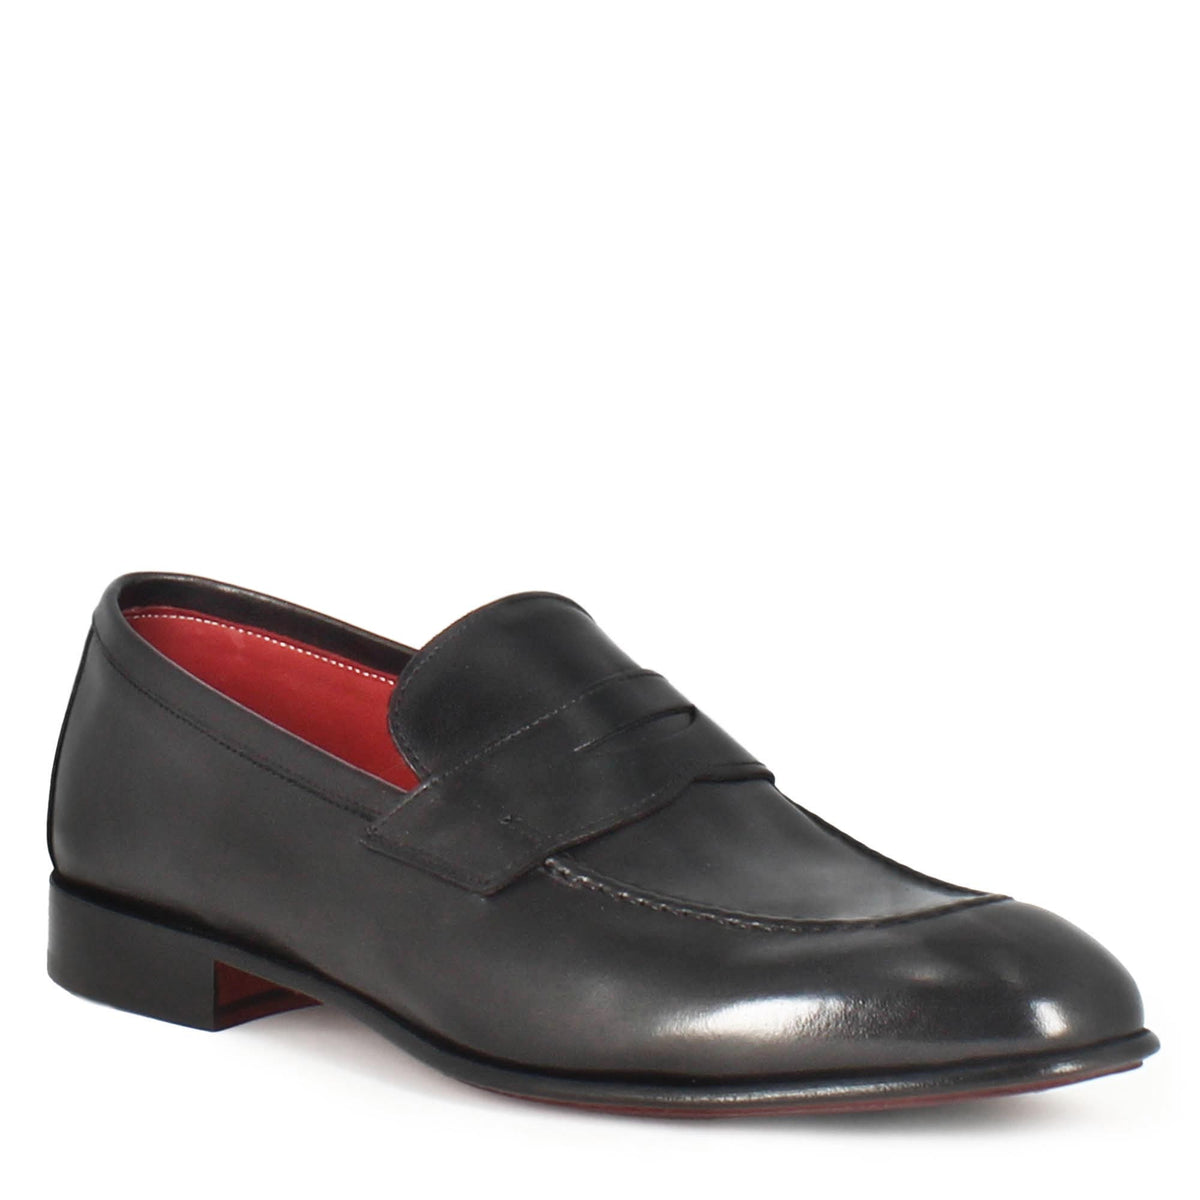 Classic men's moccasin in black leather